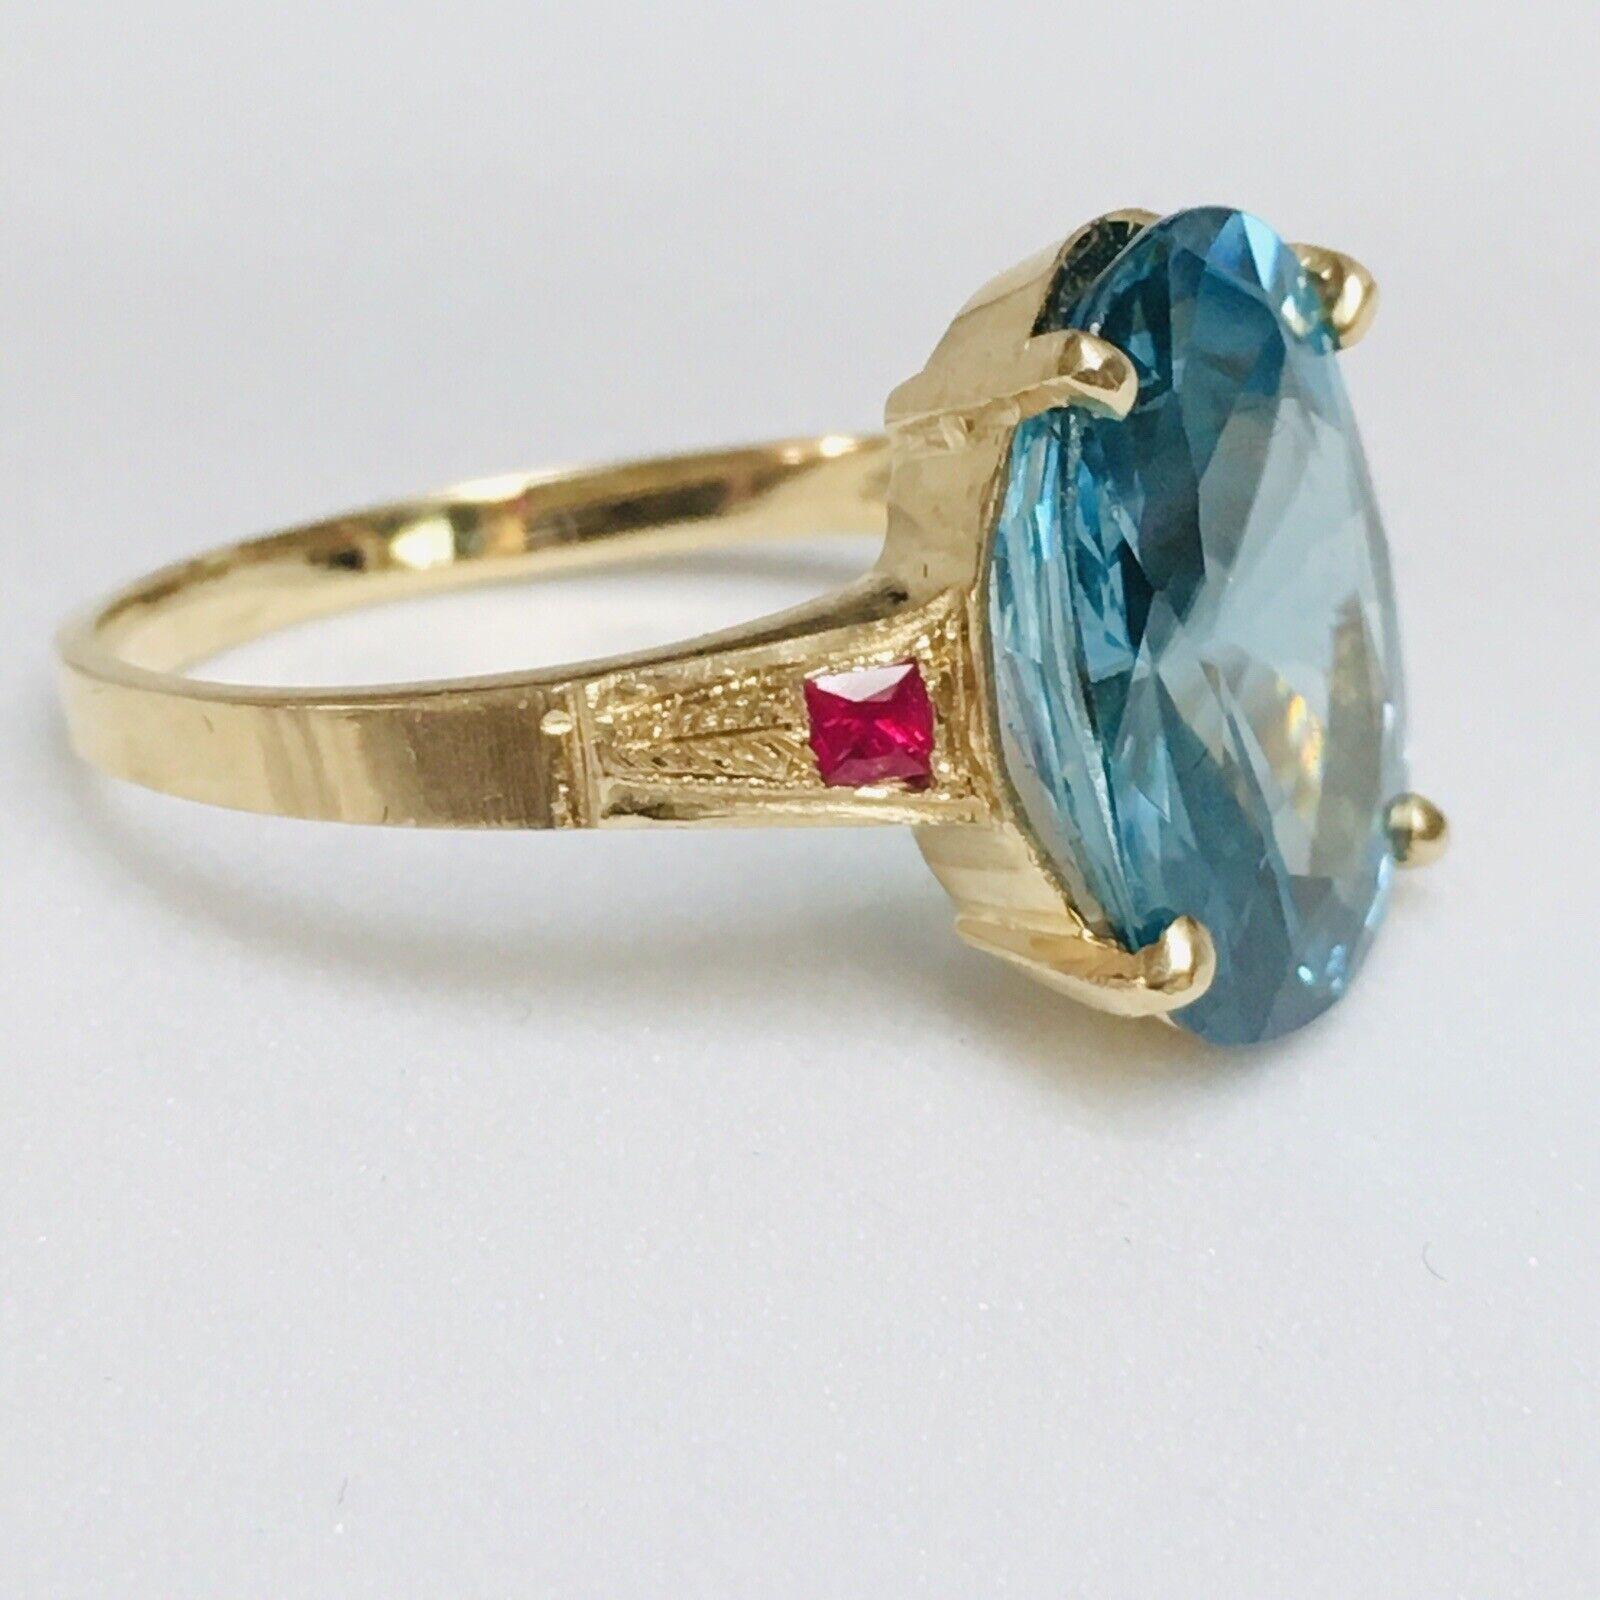 Vintage14k Yellow Gold 7.5 Carat Oval Faceted Blue Zircon Ring  

Finger Size: 7
Weight 4.2 gram
Center stone 13.9 mm by 10.4mm 5.8 mm … 7.5 Carat by measurements
Marked: 